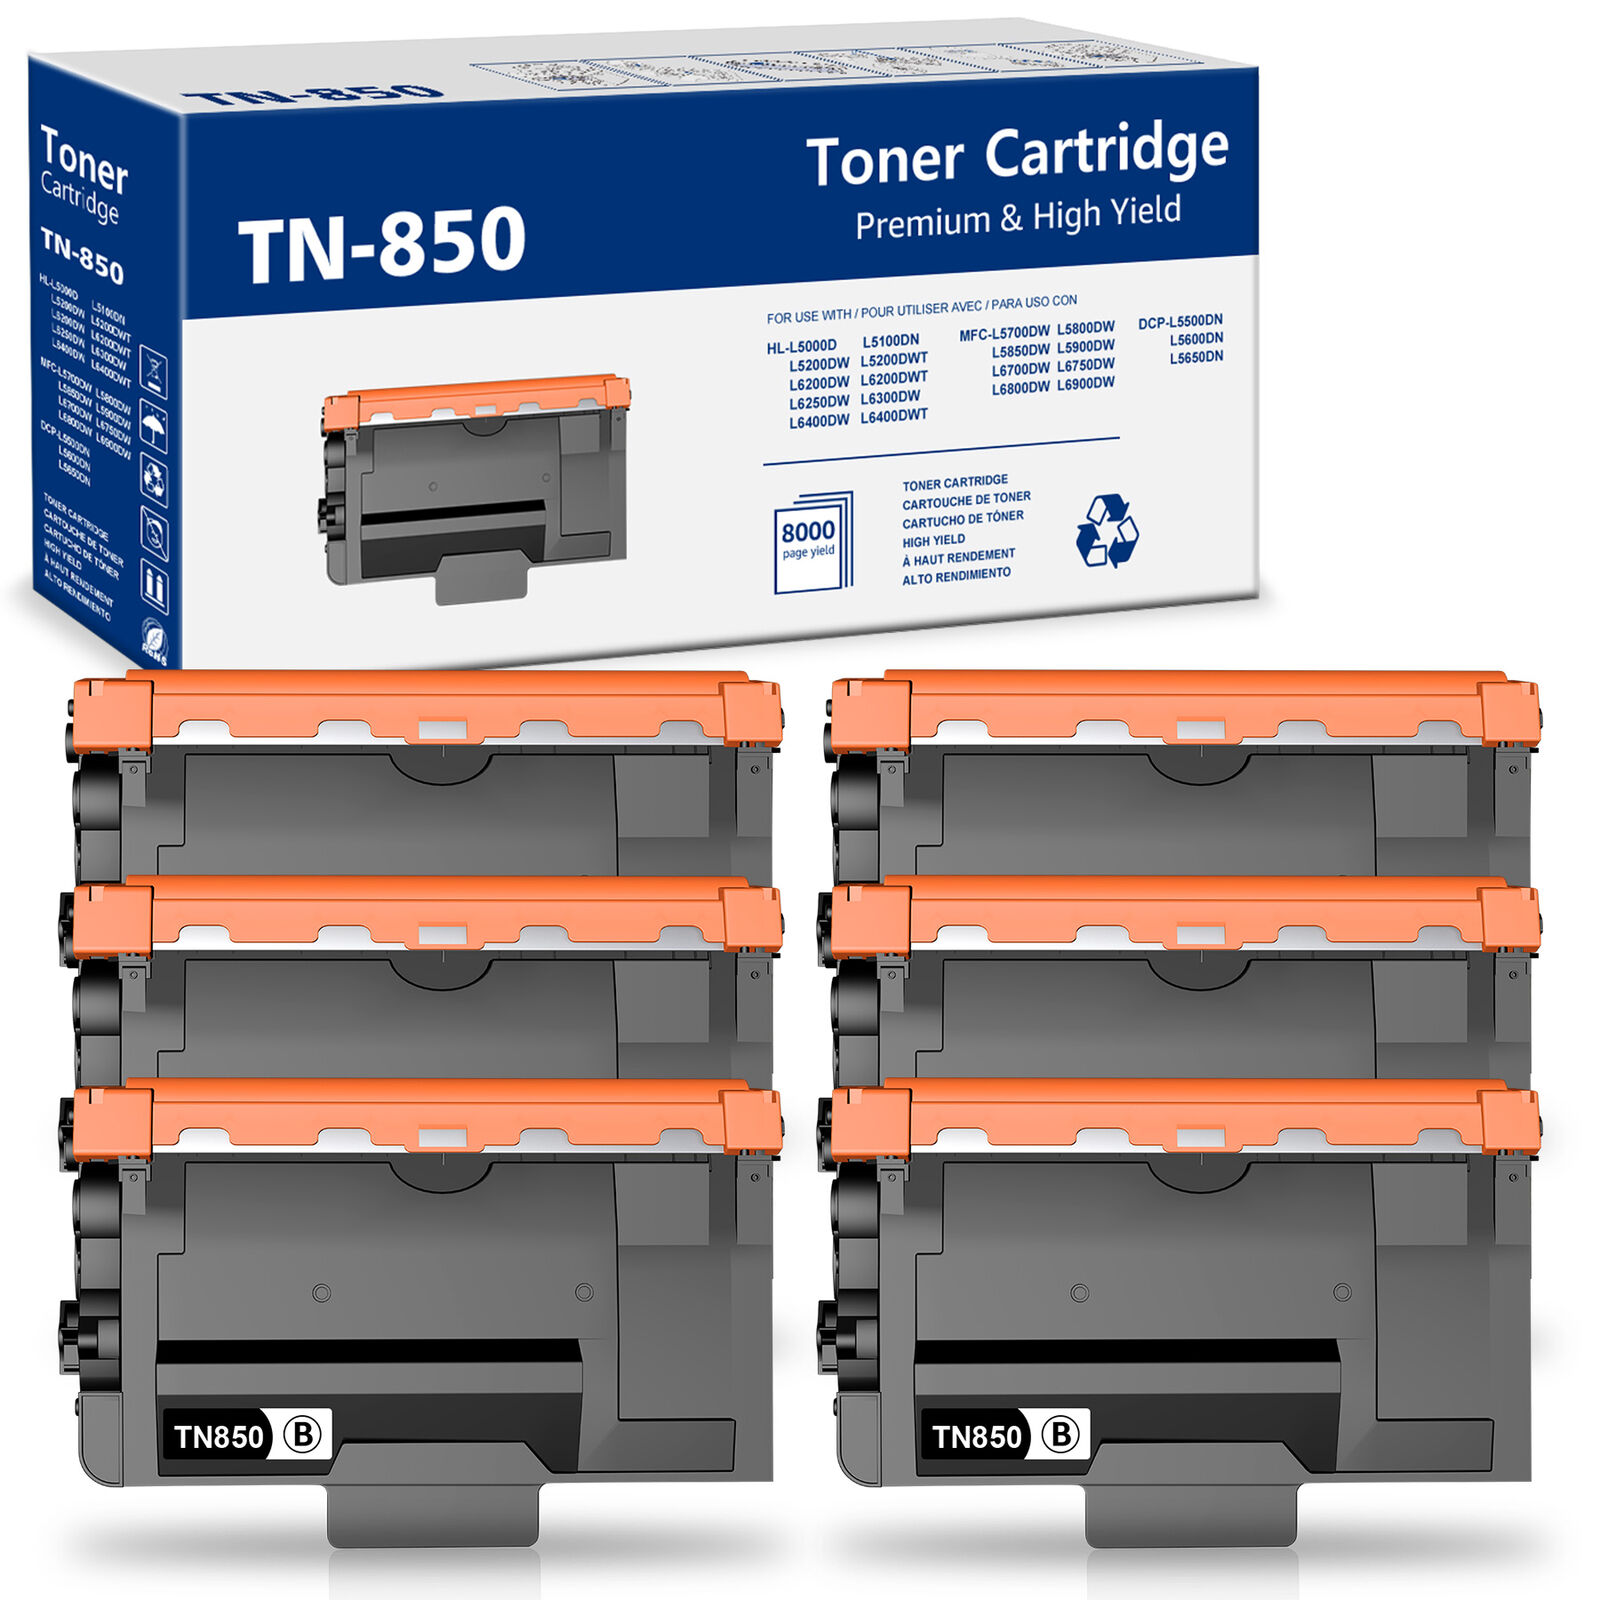 6x TN-850 Toner Cartridge Compatible for brother HL6180DWT MFC8710DN MFC8950DWTD